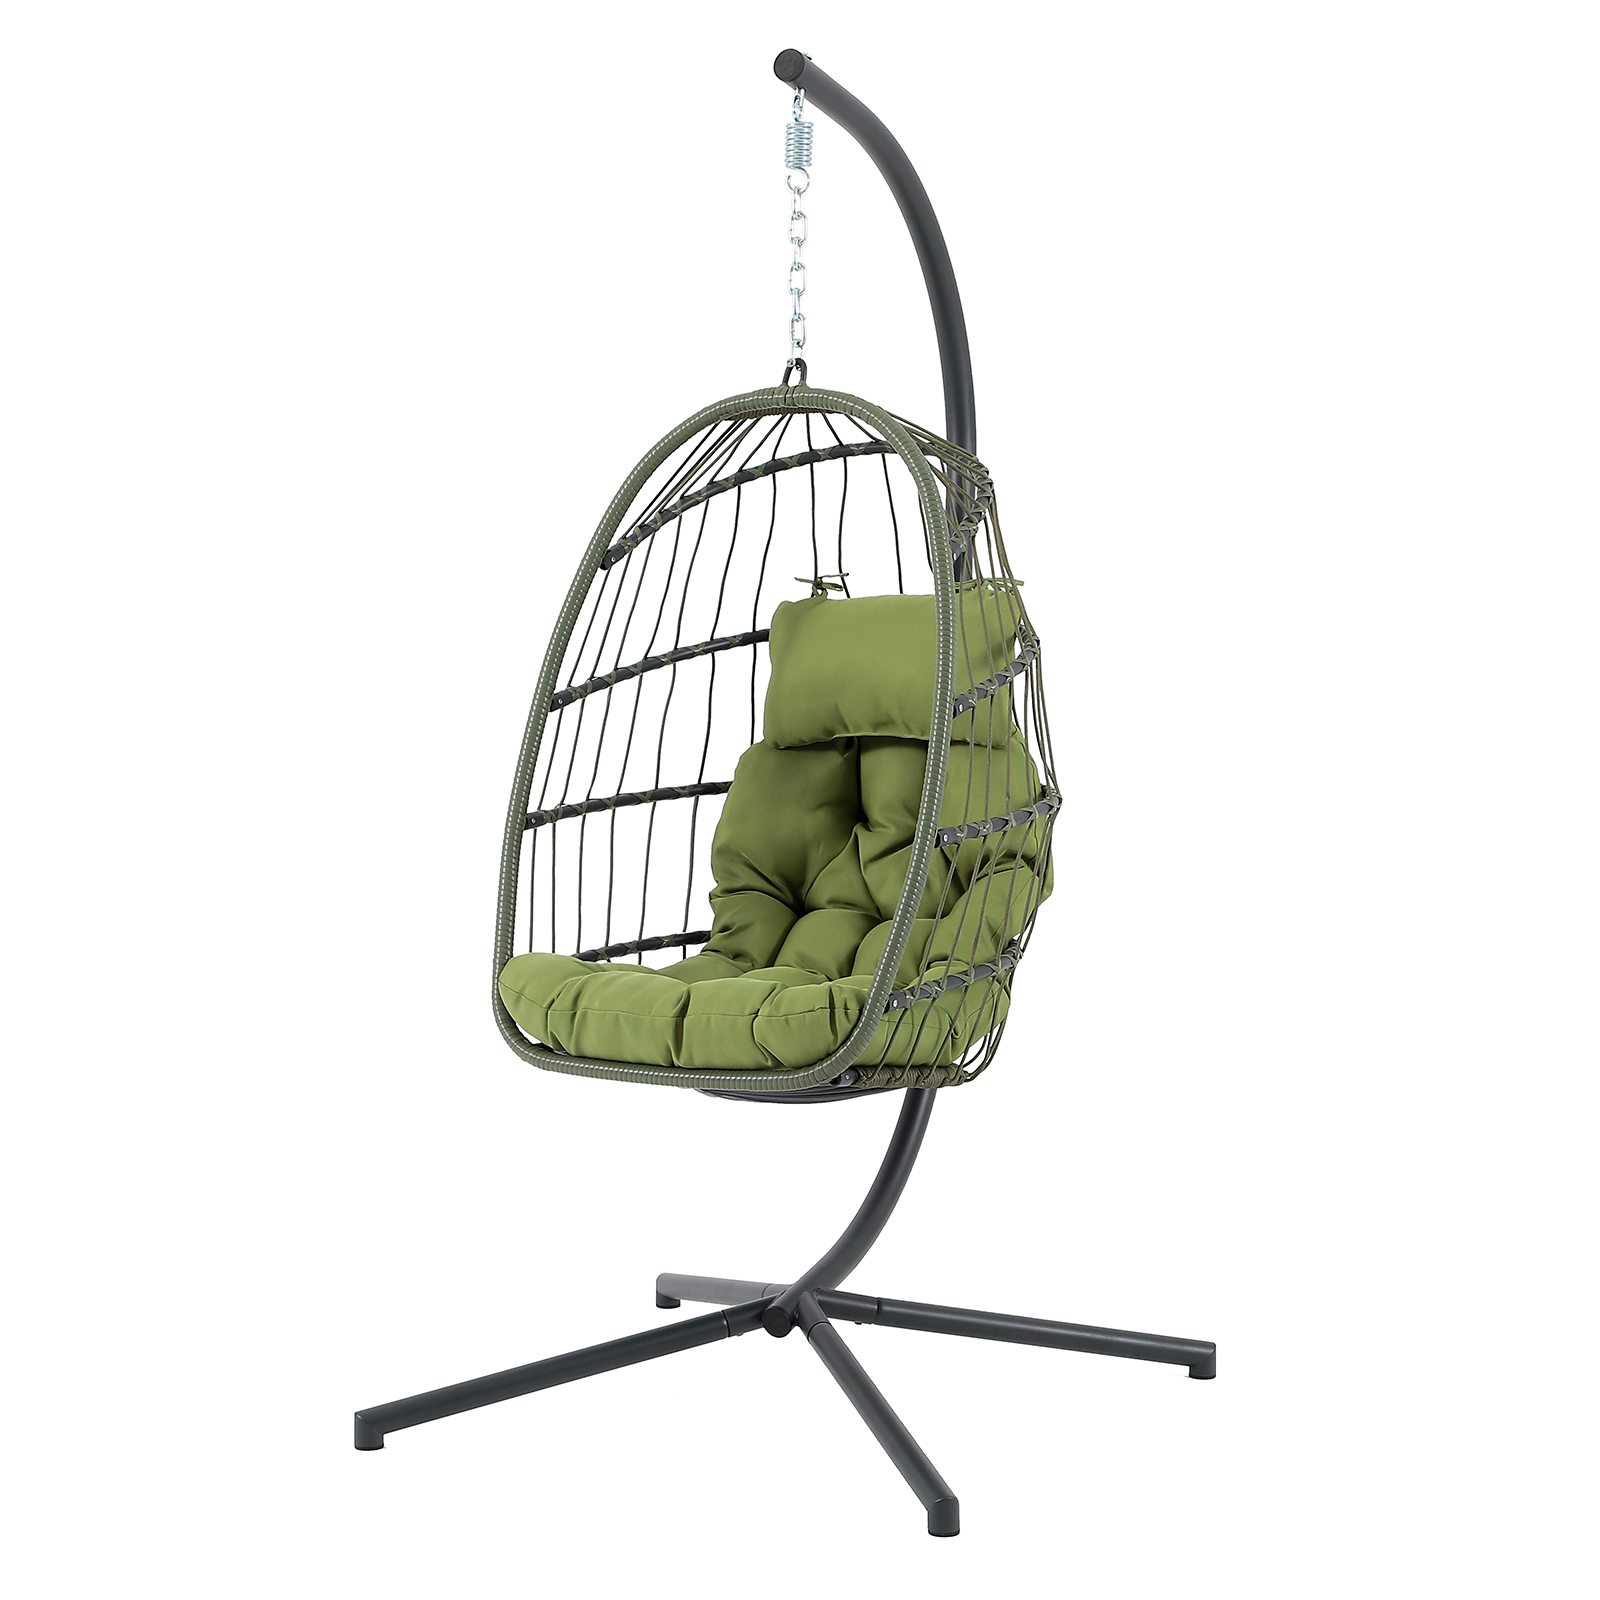 Steel Hanging Egg Chair with Stand Olive Green Outdoor Patio Swing Chair